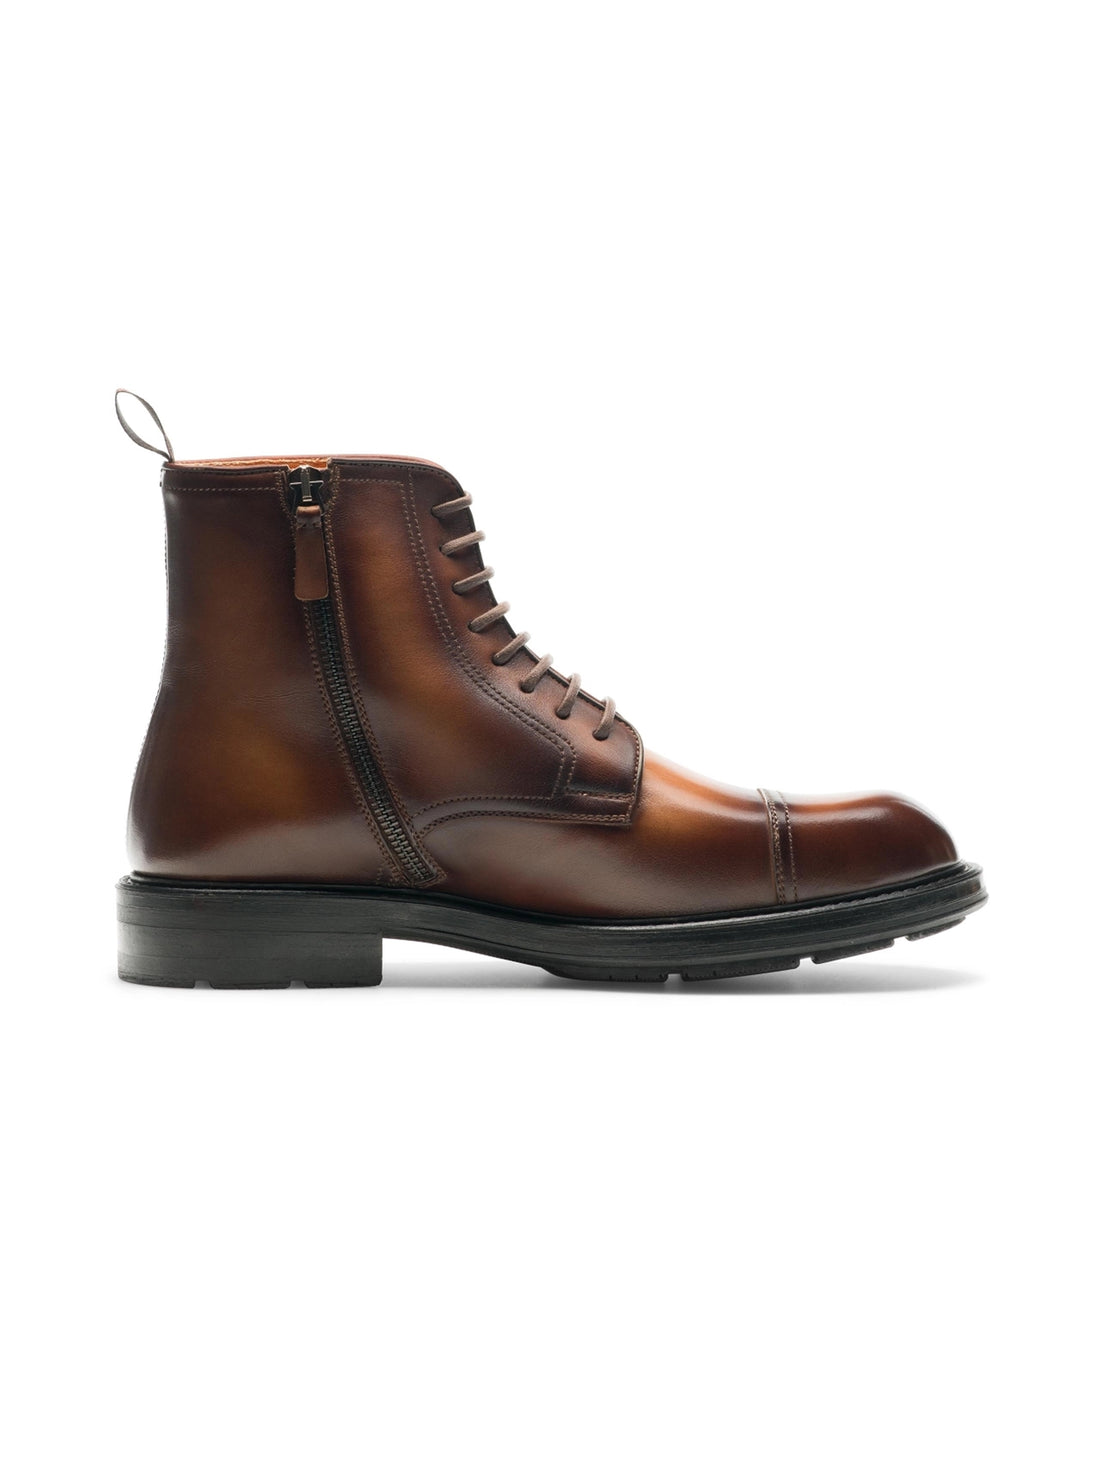 LOROTO | BROWN LACE UP BOOTS